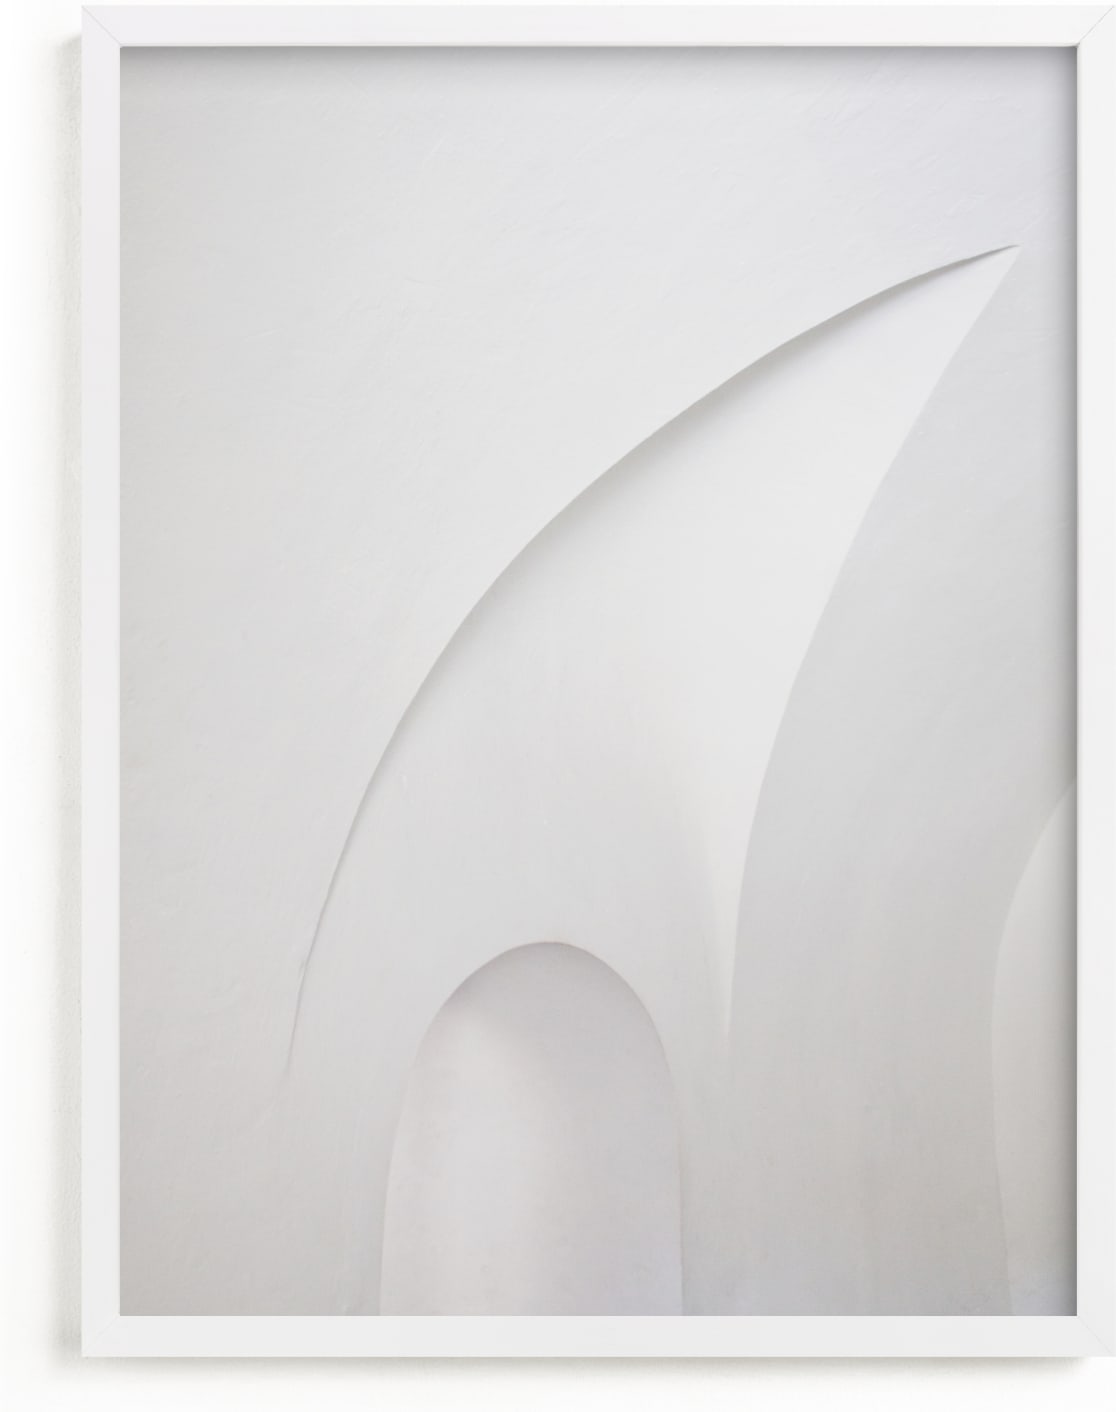 This is a white art by Anika called El Morro Archway.